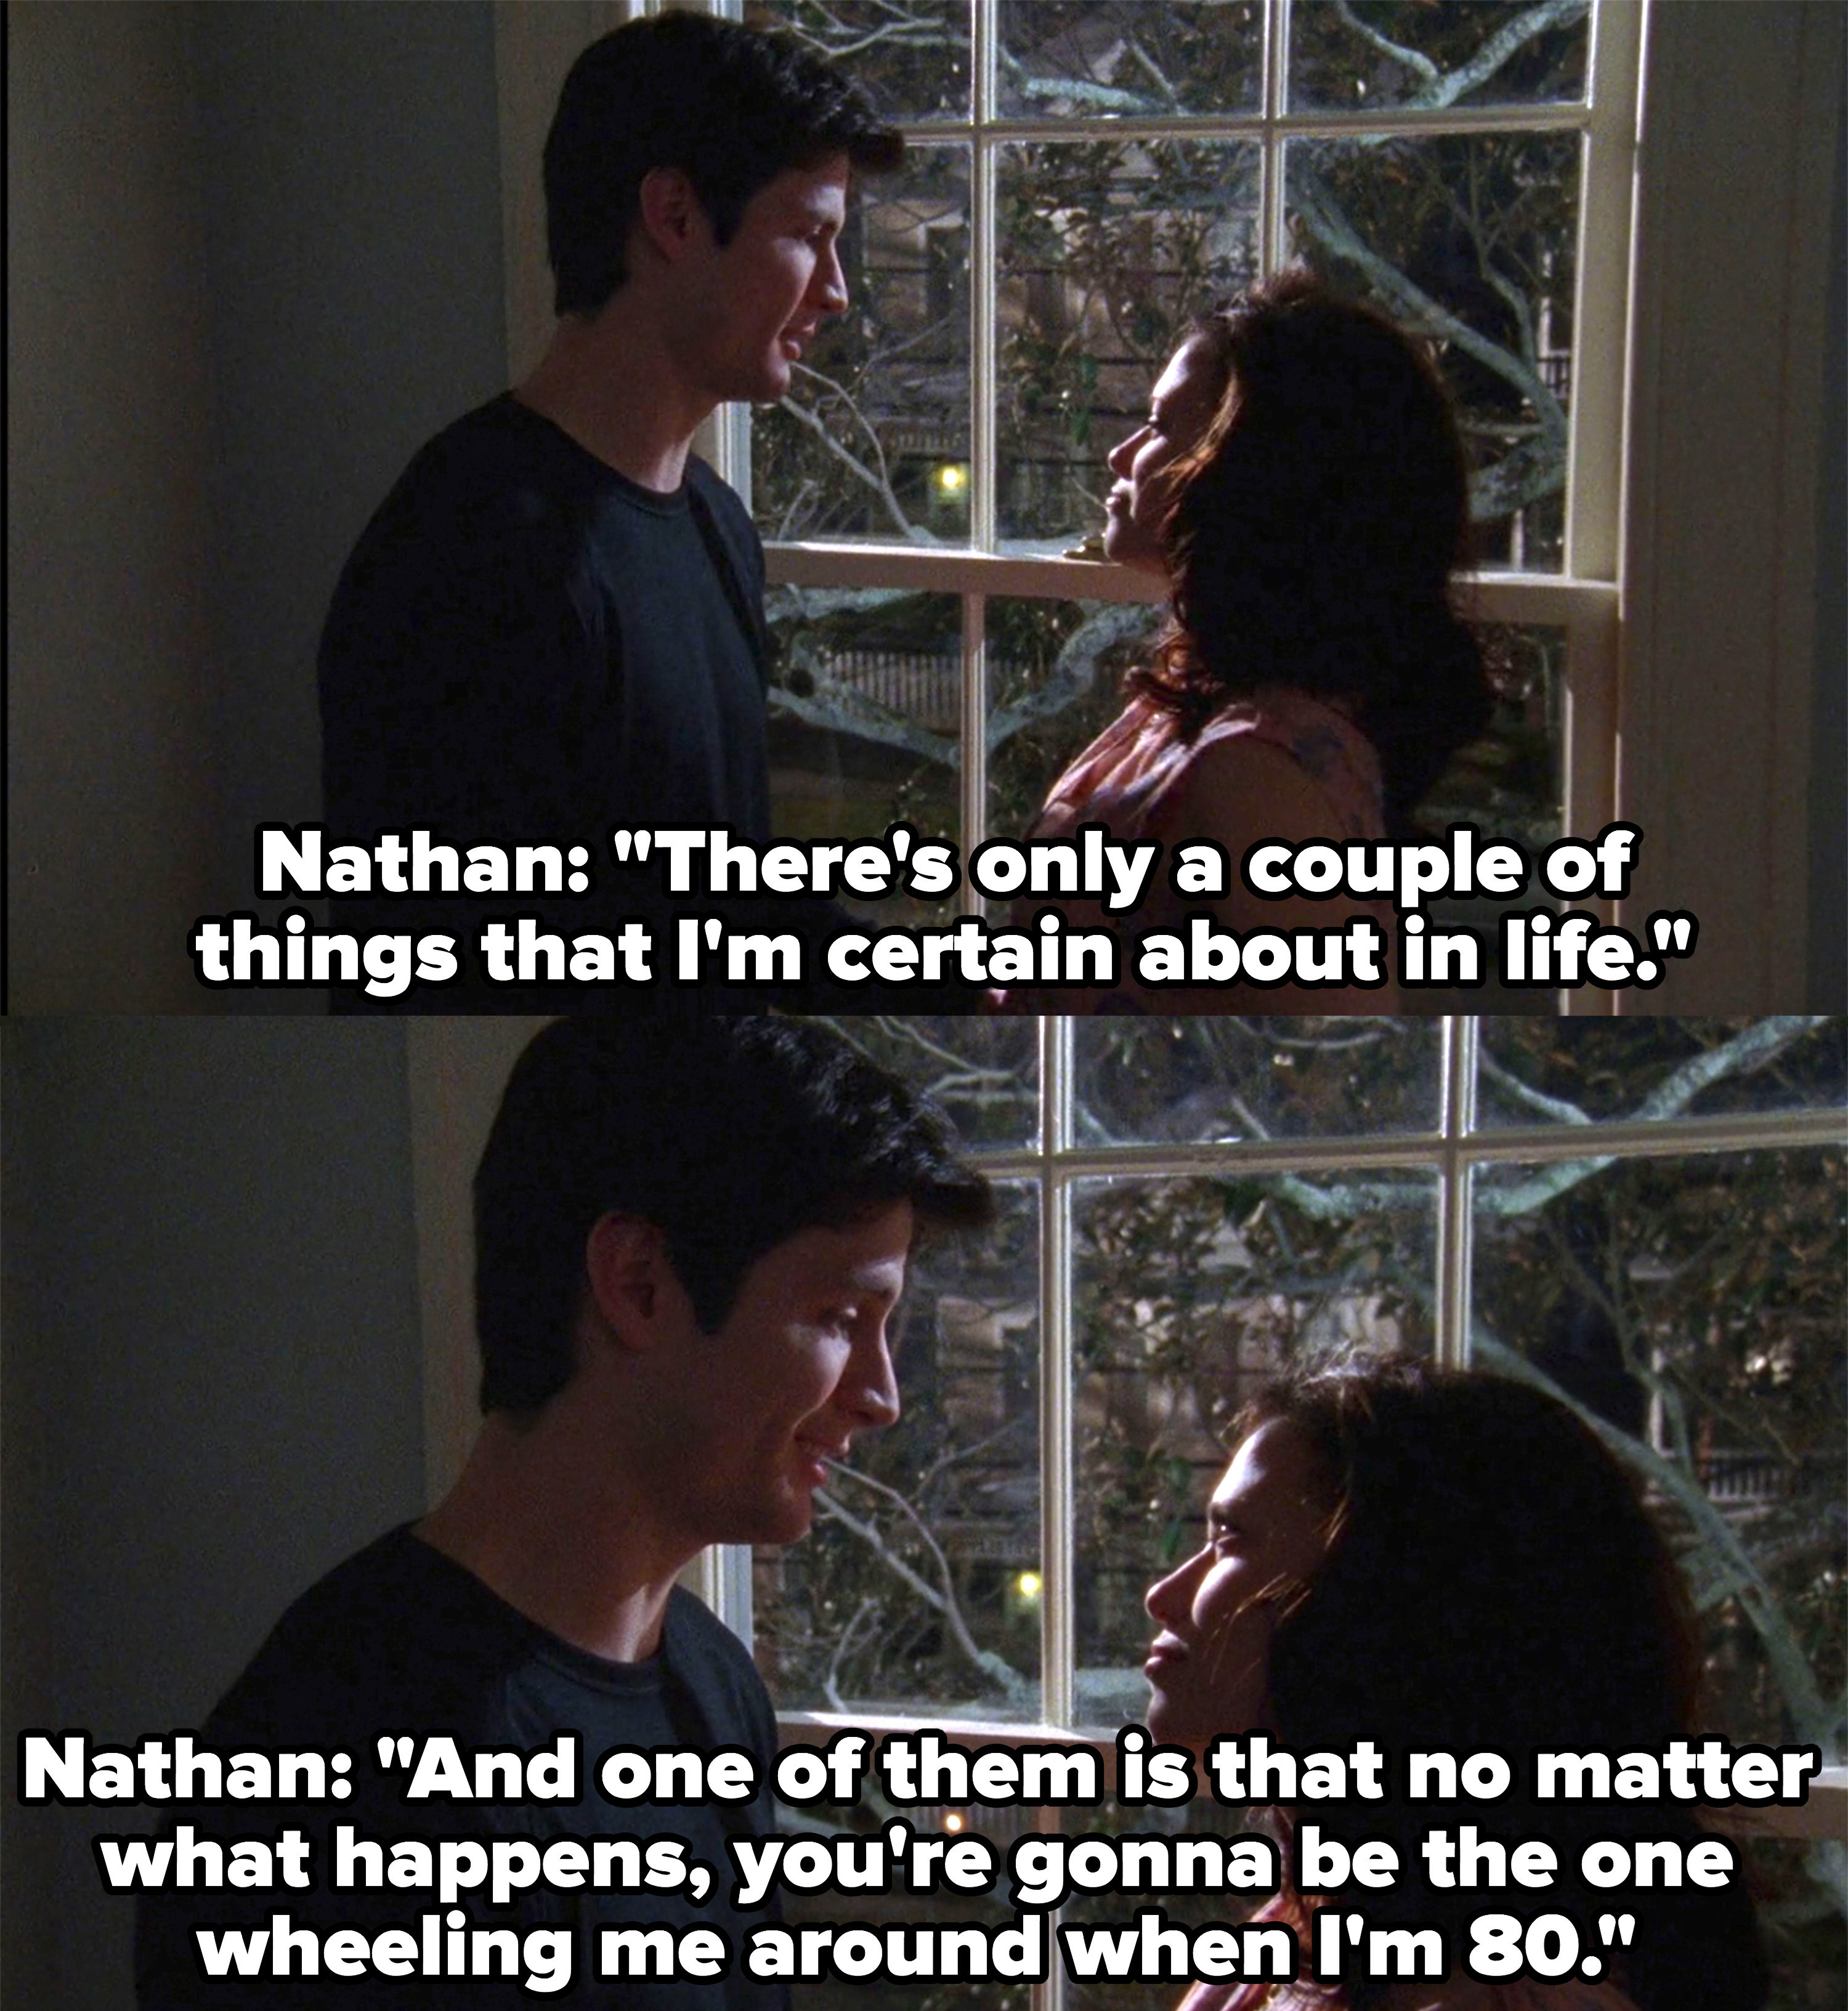 Nathan tells Haley one of the only things he&#x27;s certain of is that she&#x27;s going to be the one wheeling him around when he&#x27;s 80